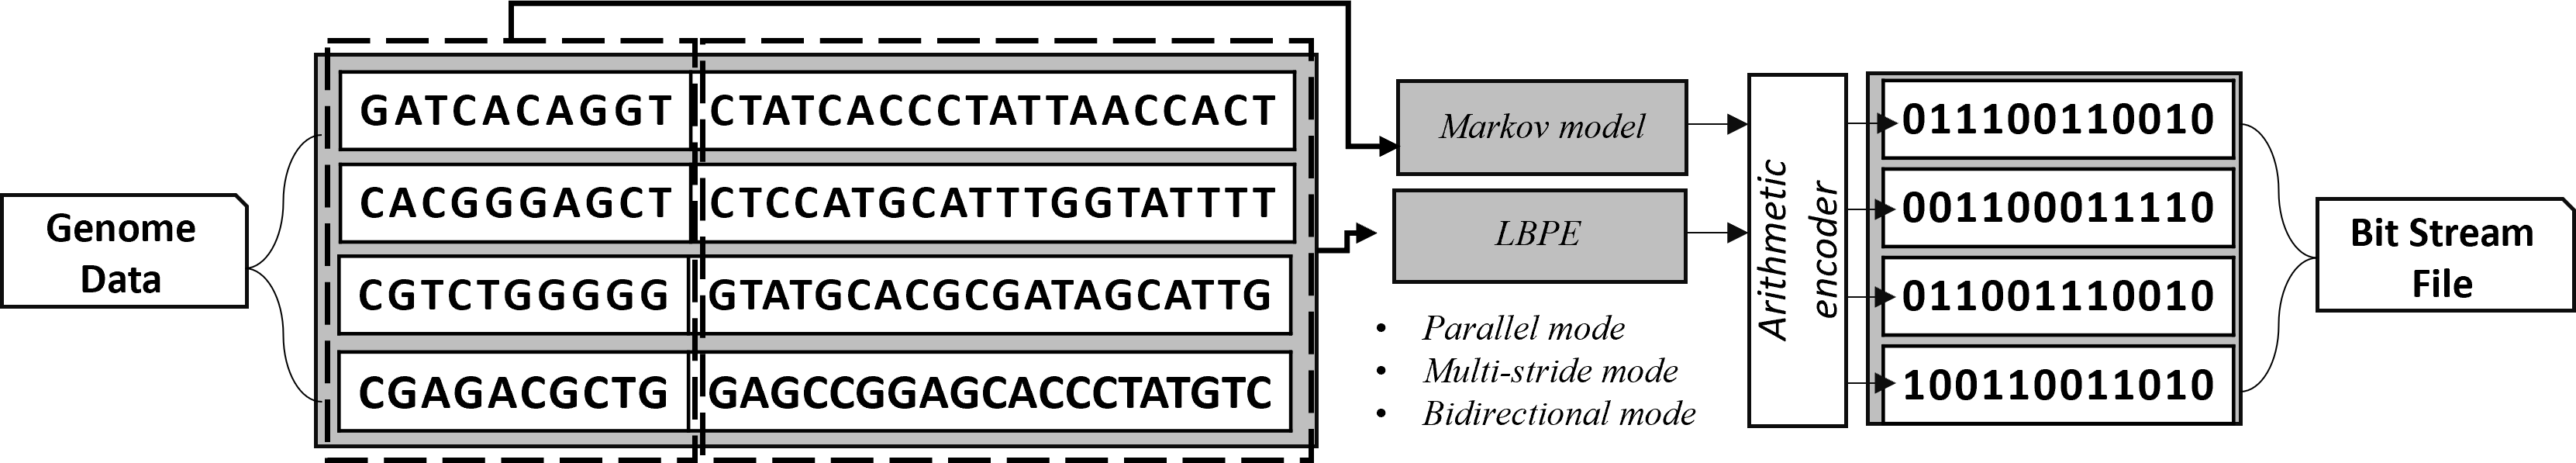 Learning-based Genome Codec 1